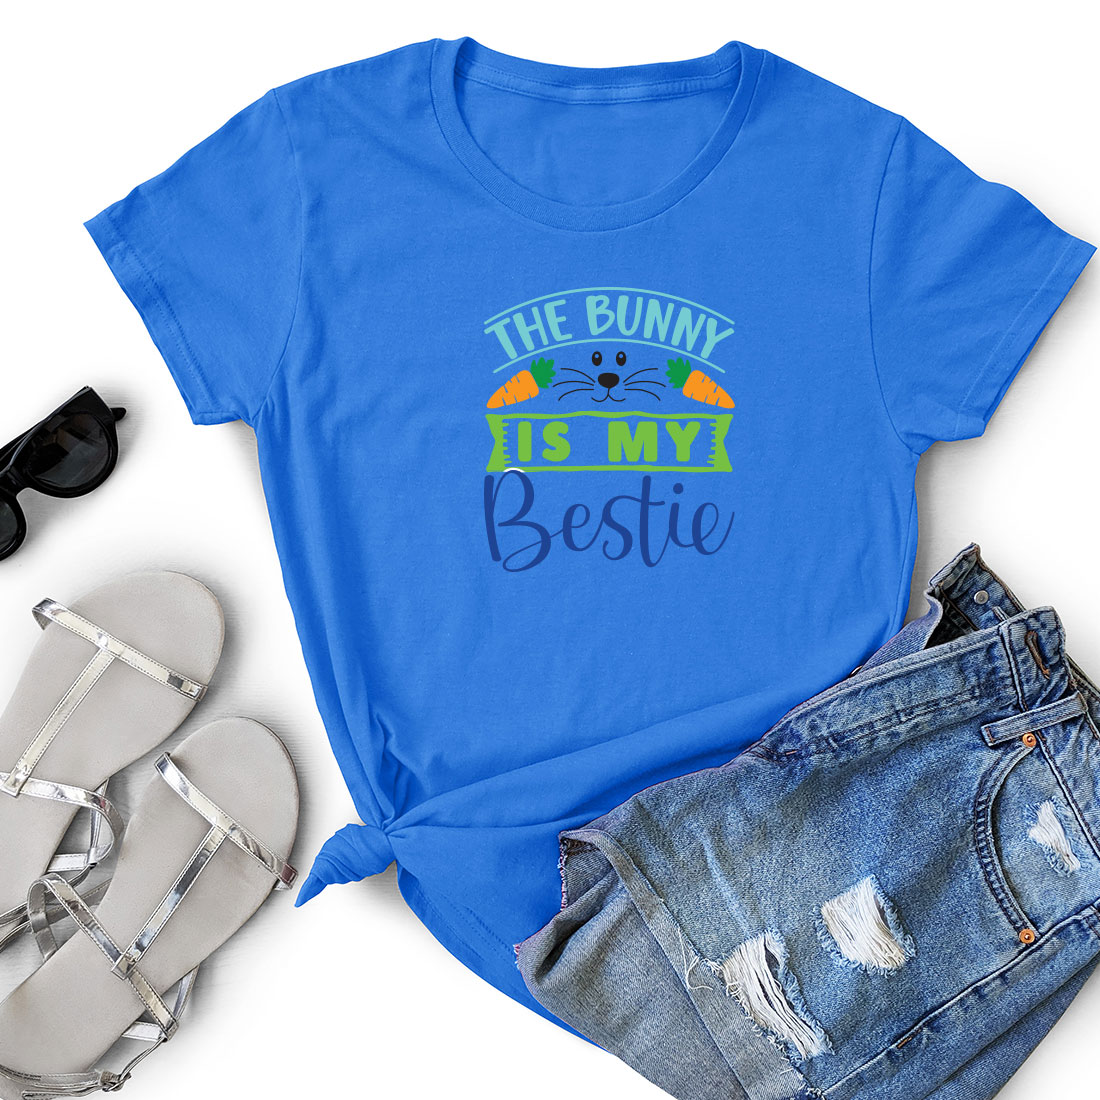 T - shirt that says the bunny is my bestie.